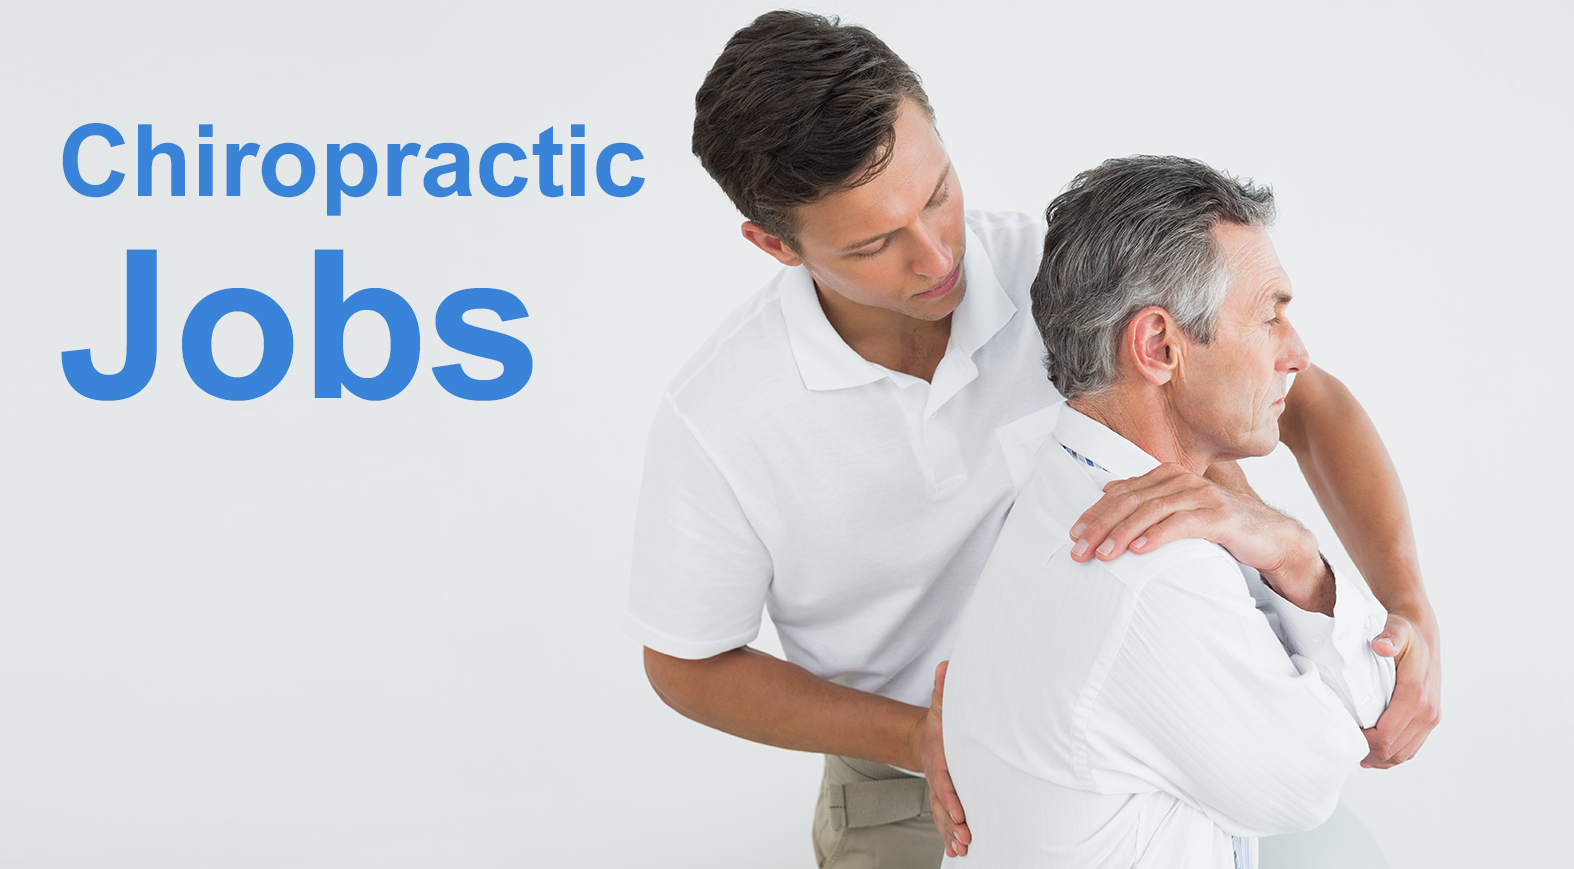 chiropractic jobs south west london